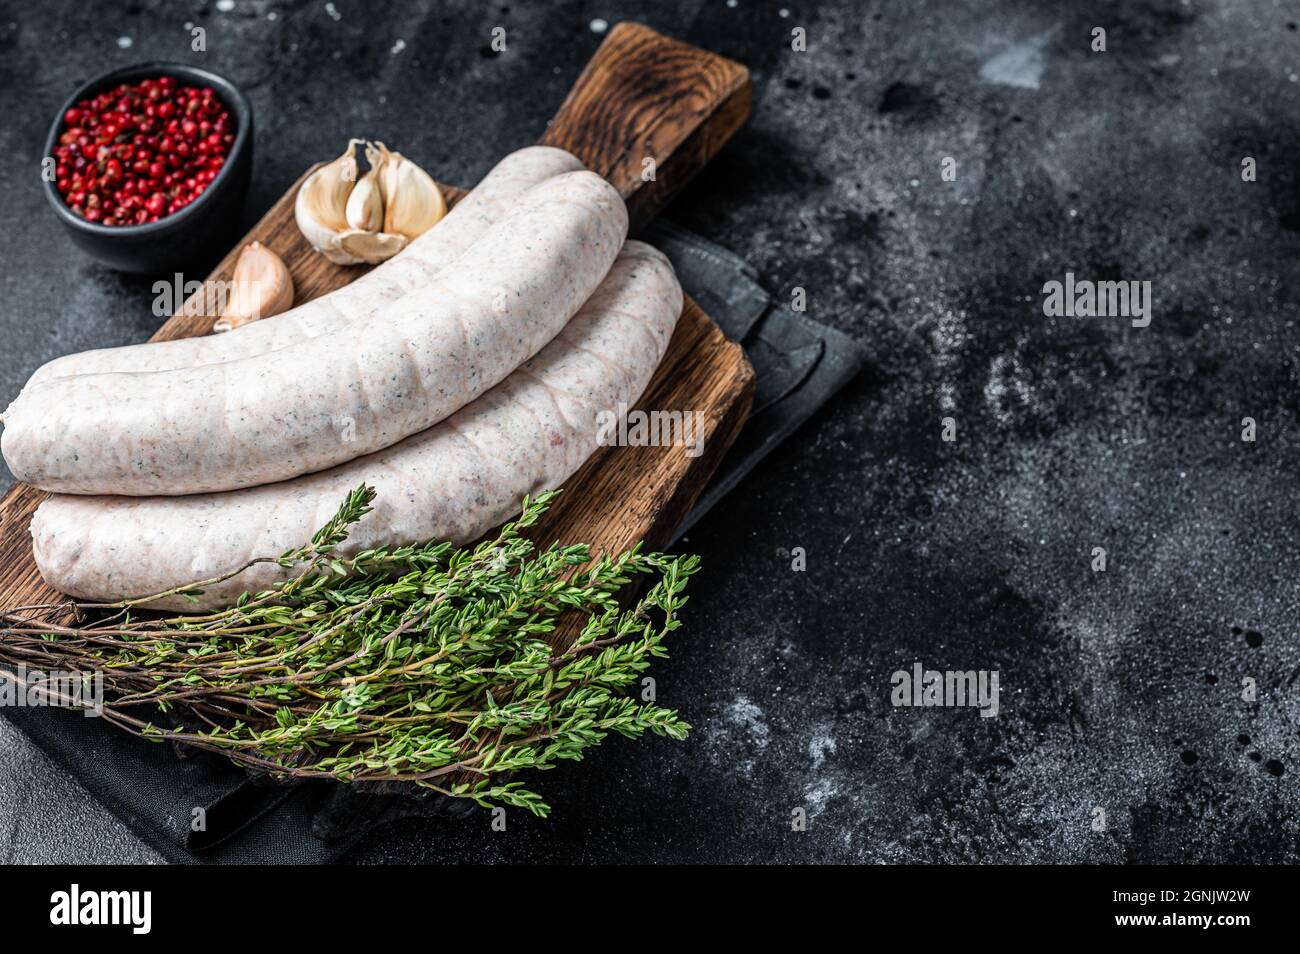 Raw Munich white sausage weisswurst on wooden board. Black background. Top view. Copy space Stock Photo